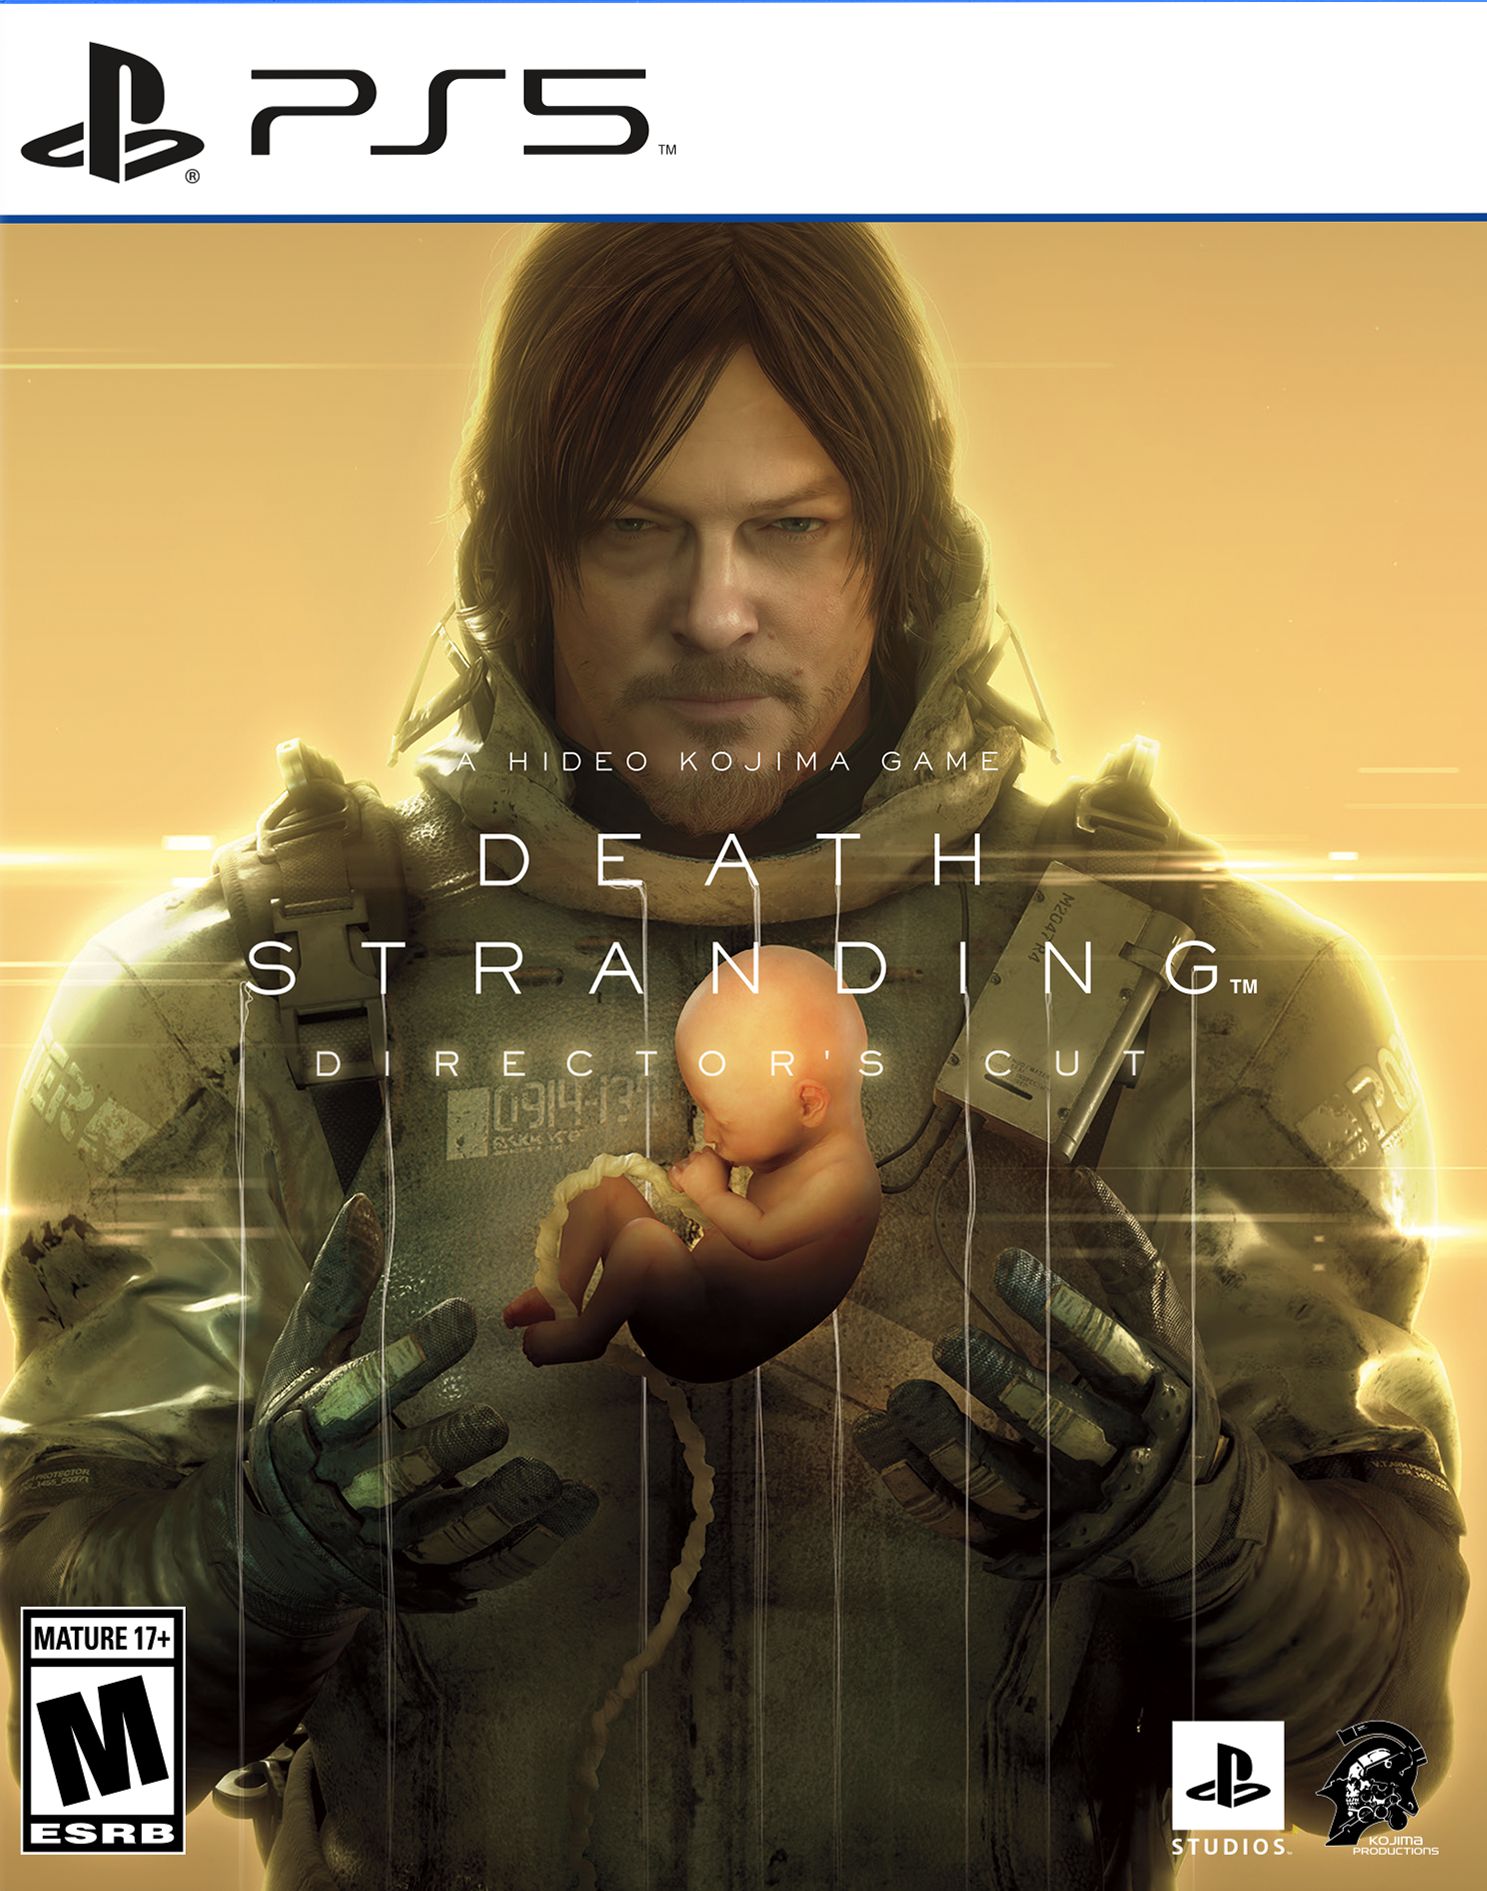 All Confirmed Differences in Death Stranding: Director's Cut